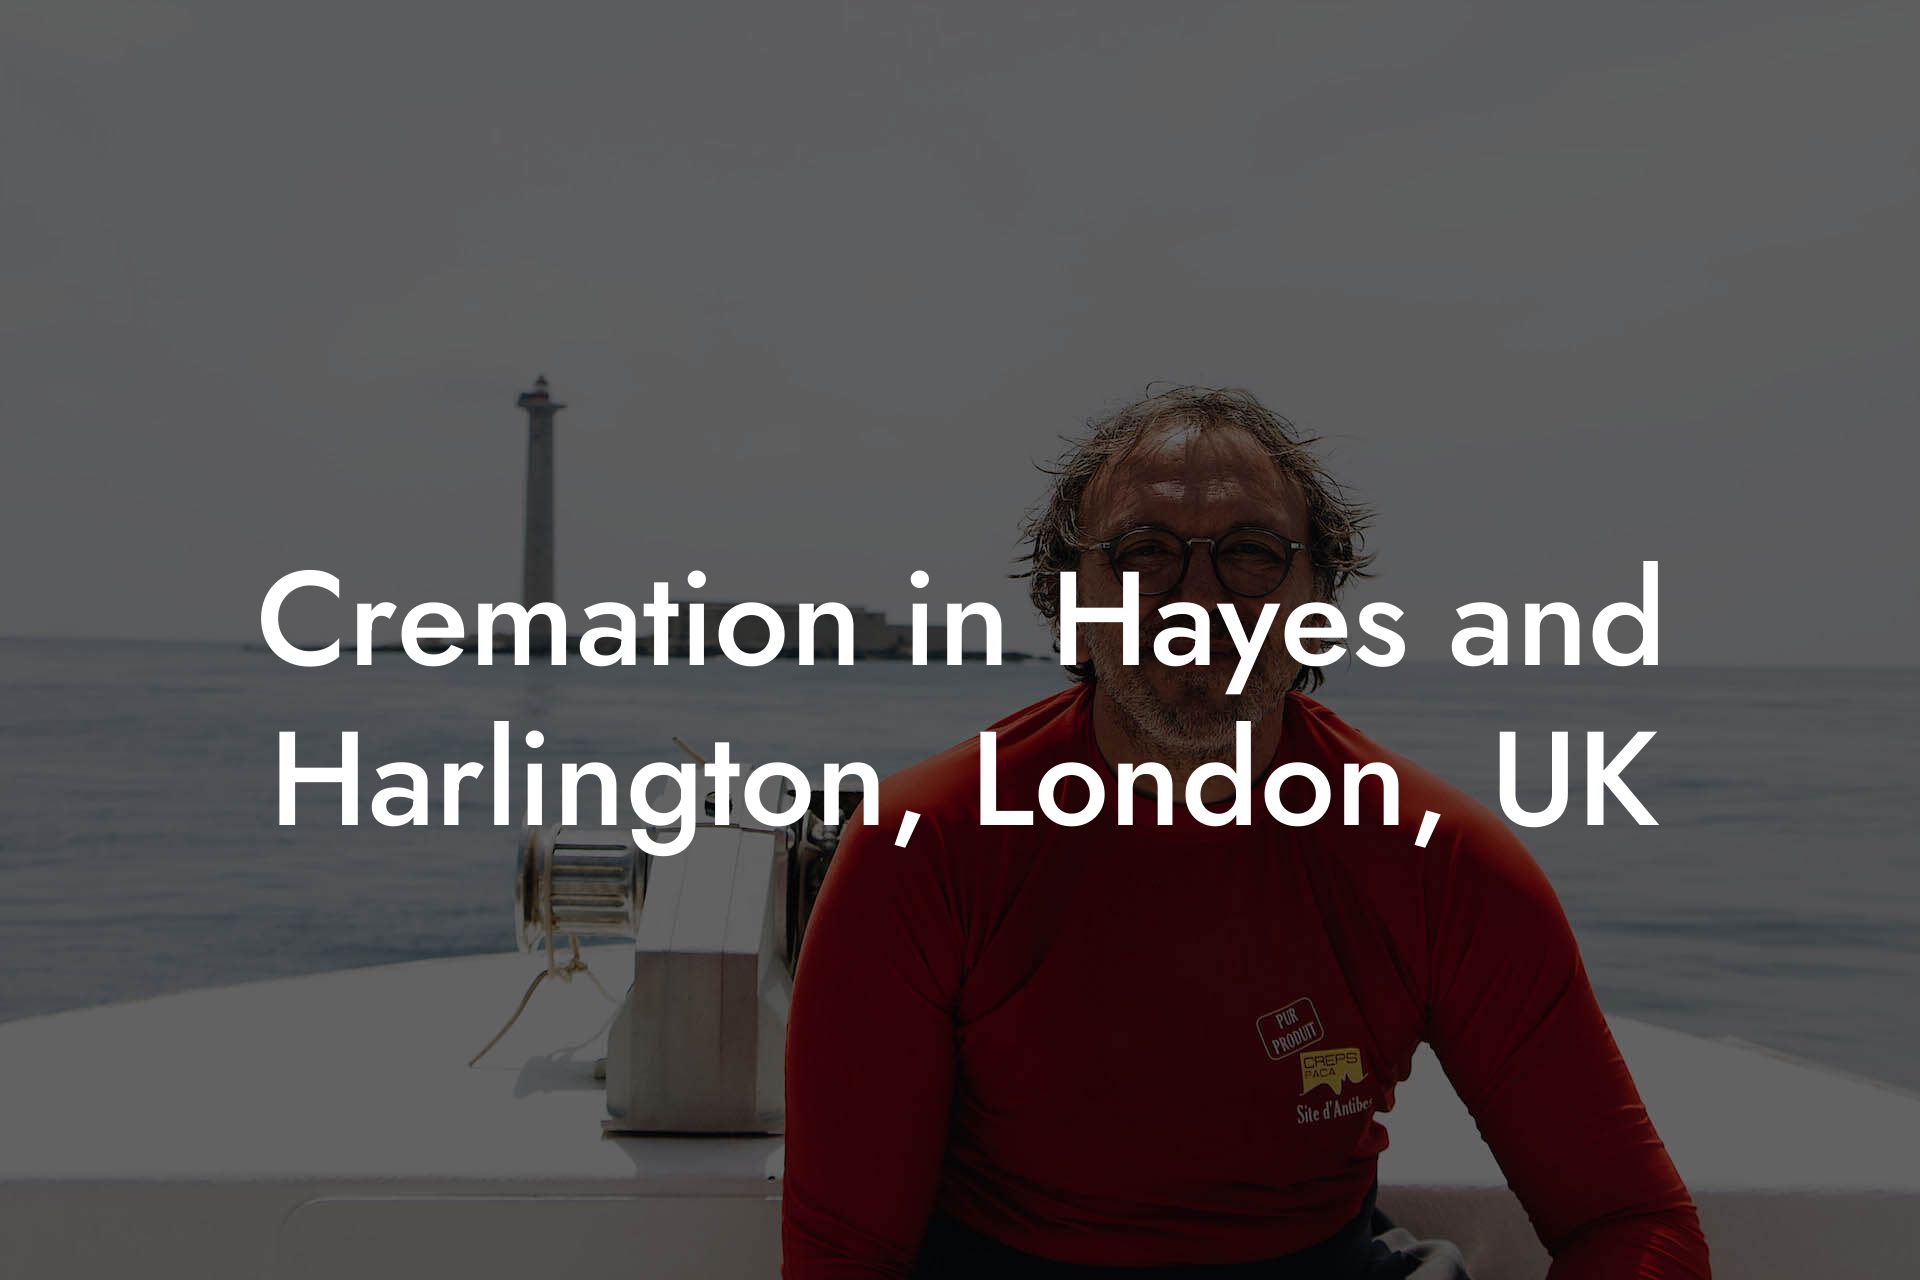 Cremation in Hayes and Harlington, London, UK